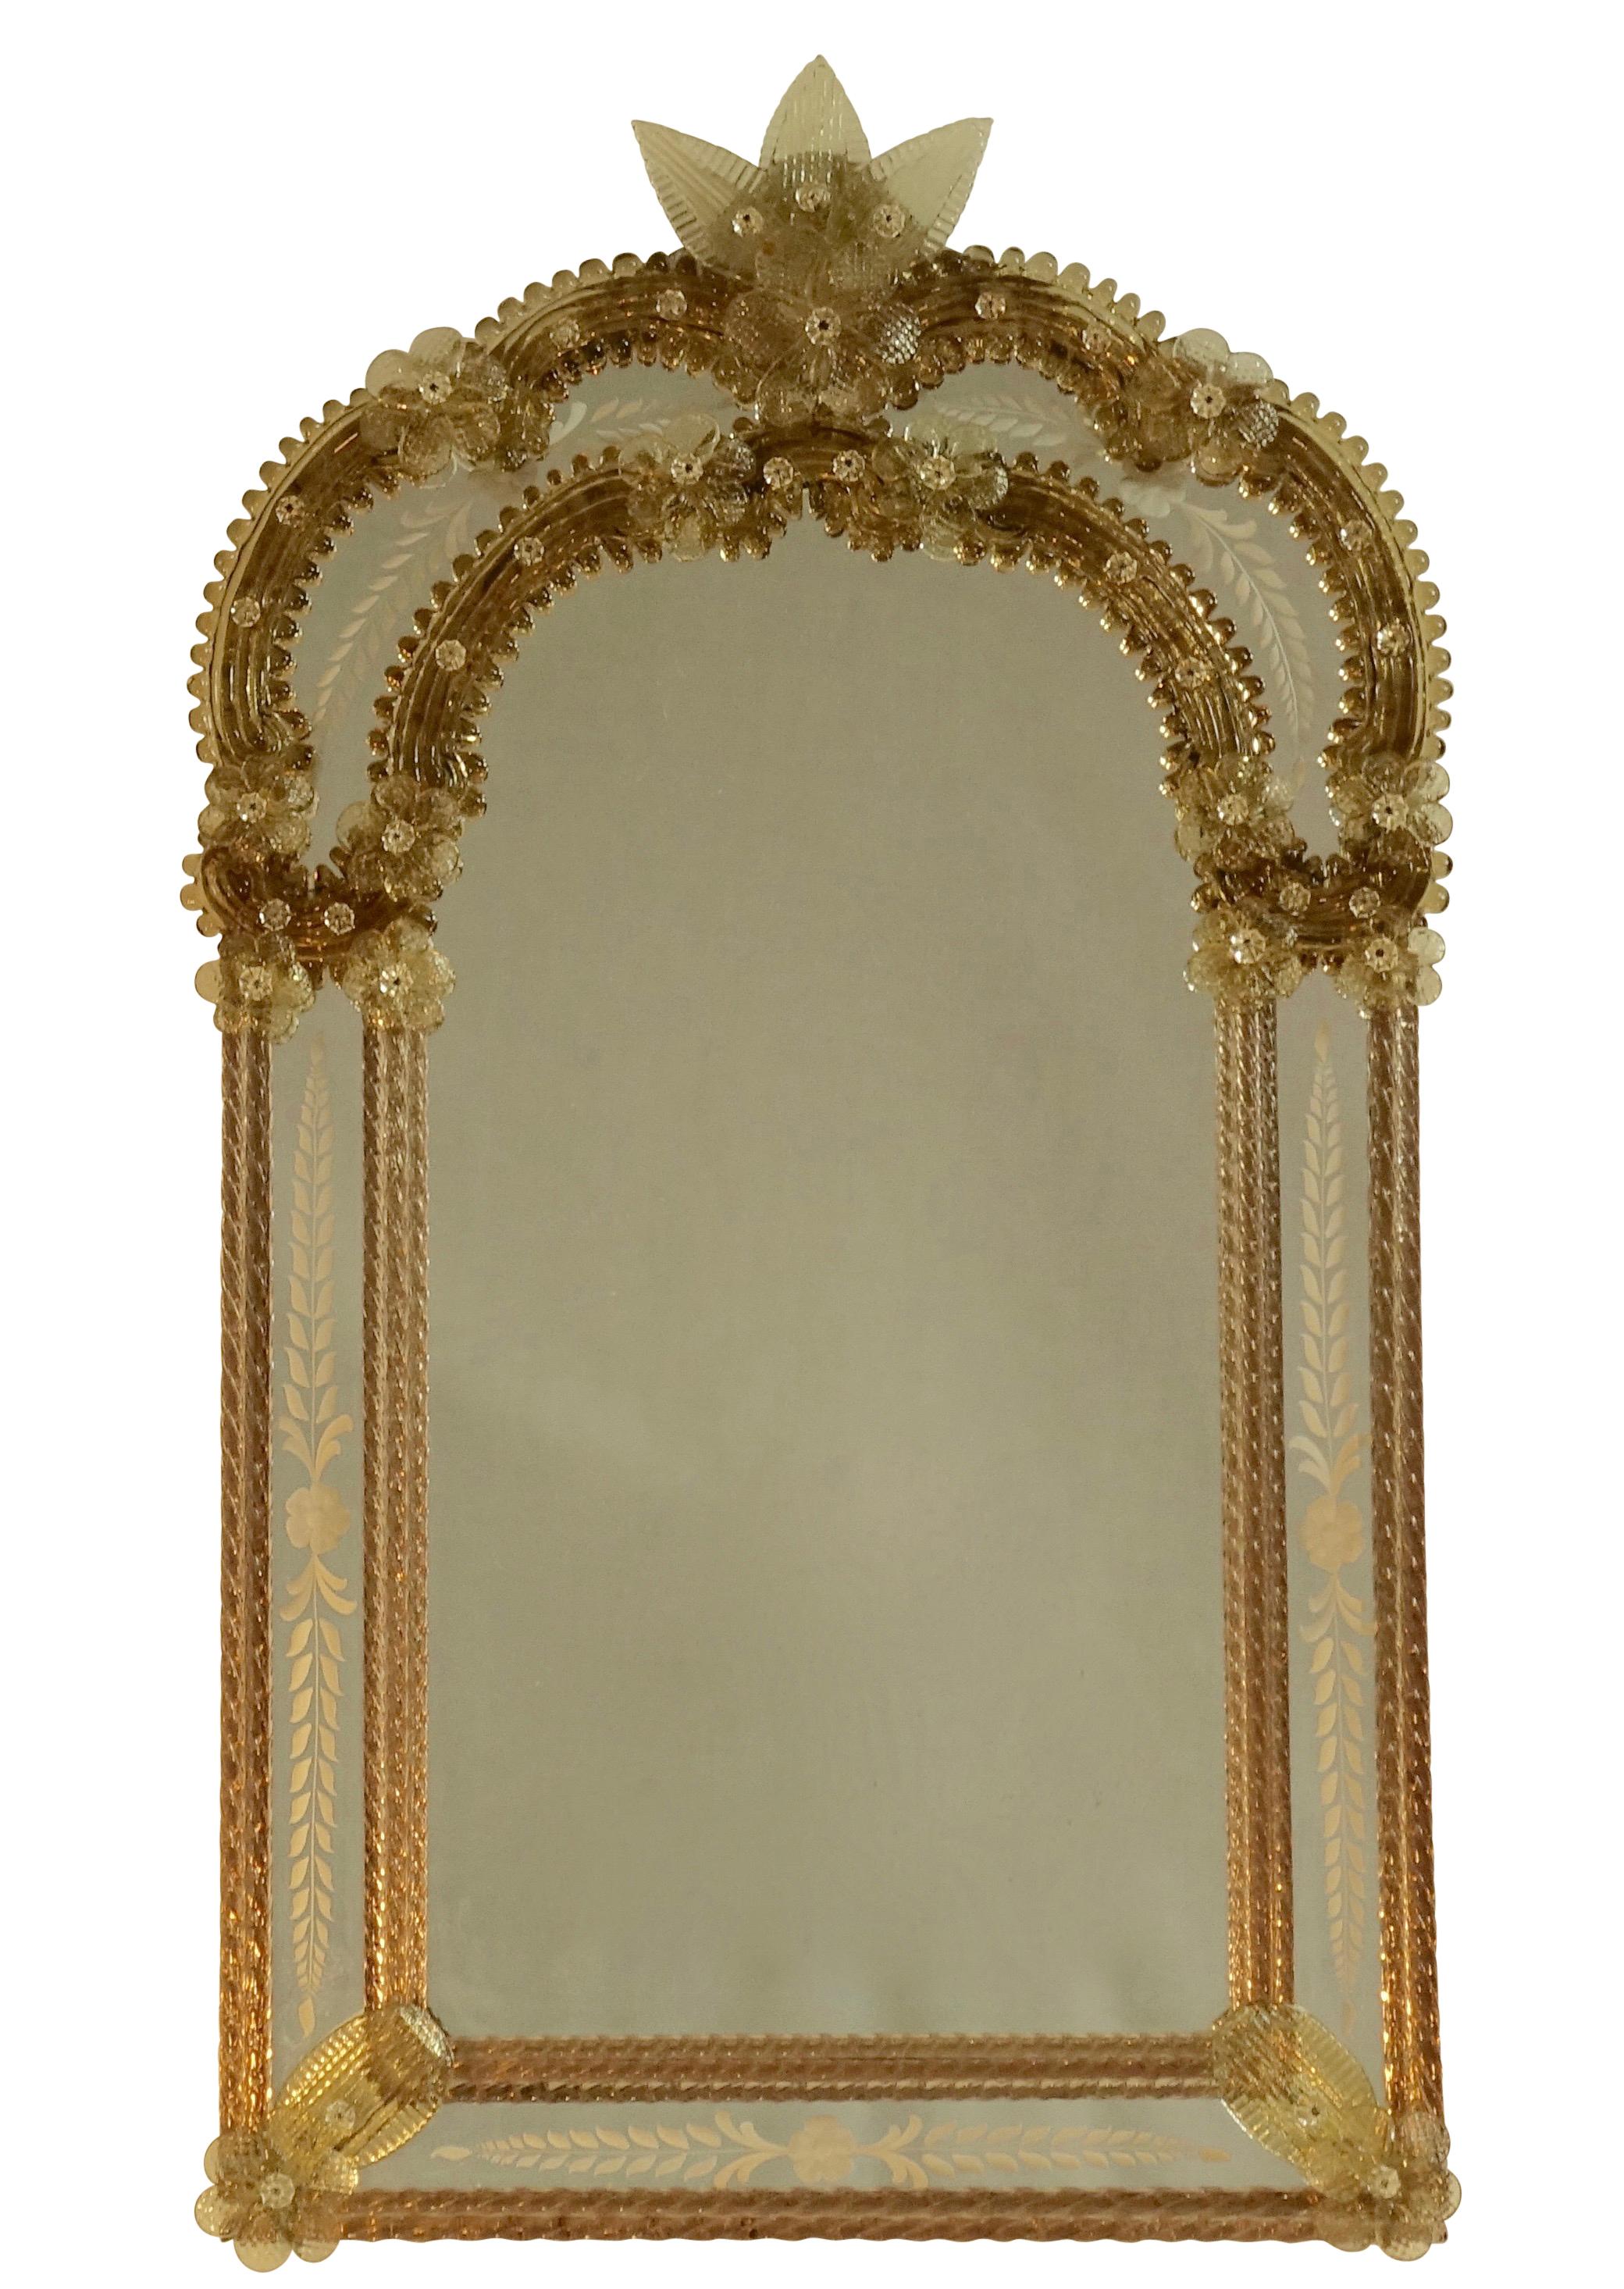 Arched shape top Venetian mirror with smokey topaz colored glass, adorned with glass florets and leaves, and having an etched design in the glass panels. Italian, circa 1950.